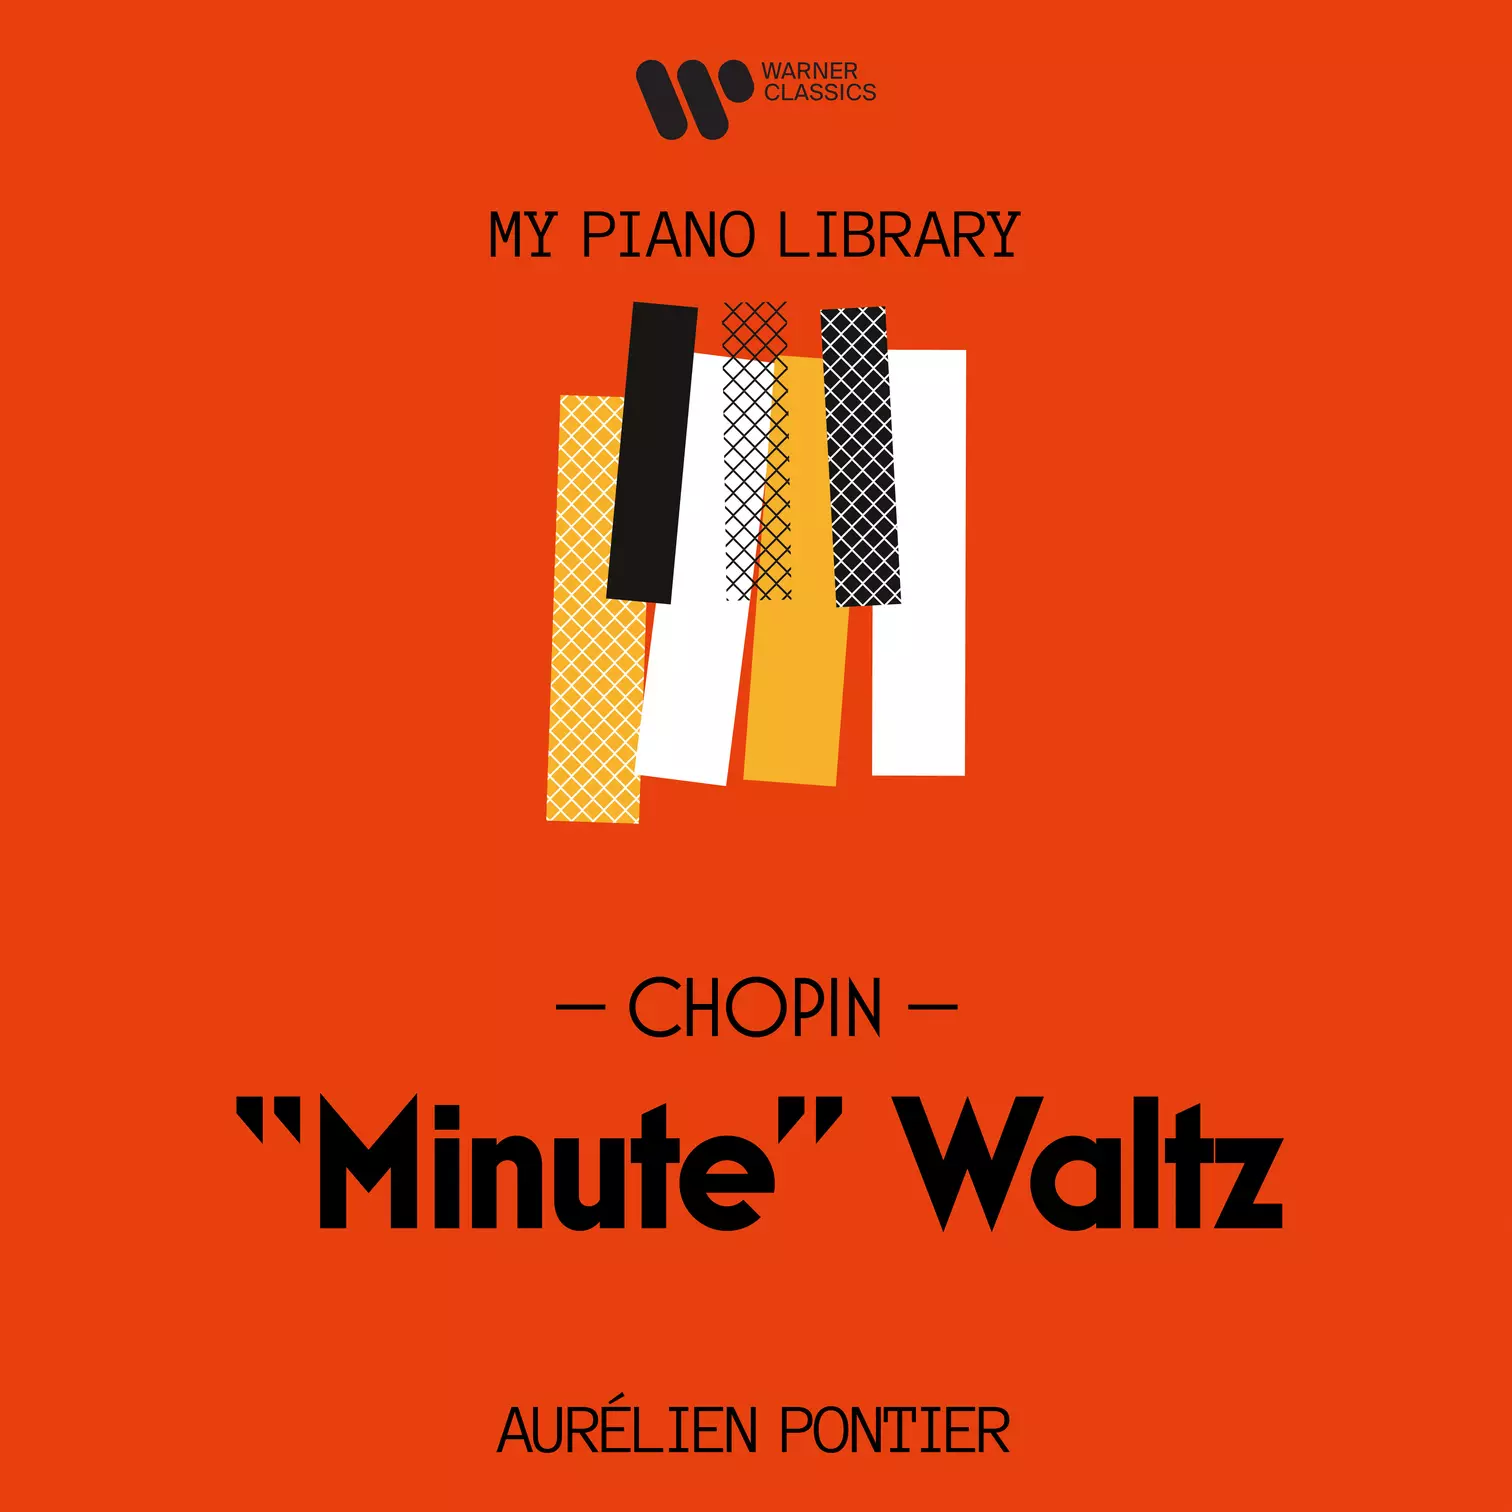 My Piano Library: Chopin - "Minute" Waltz Pontier